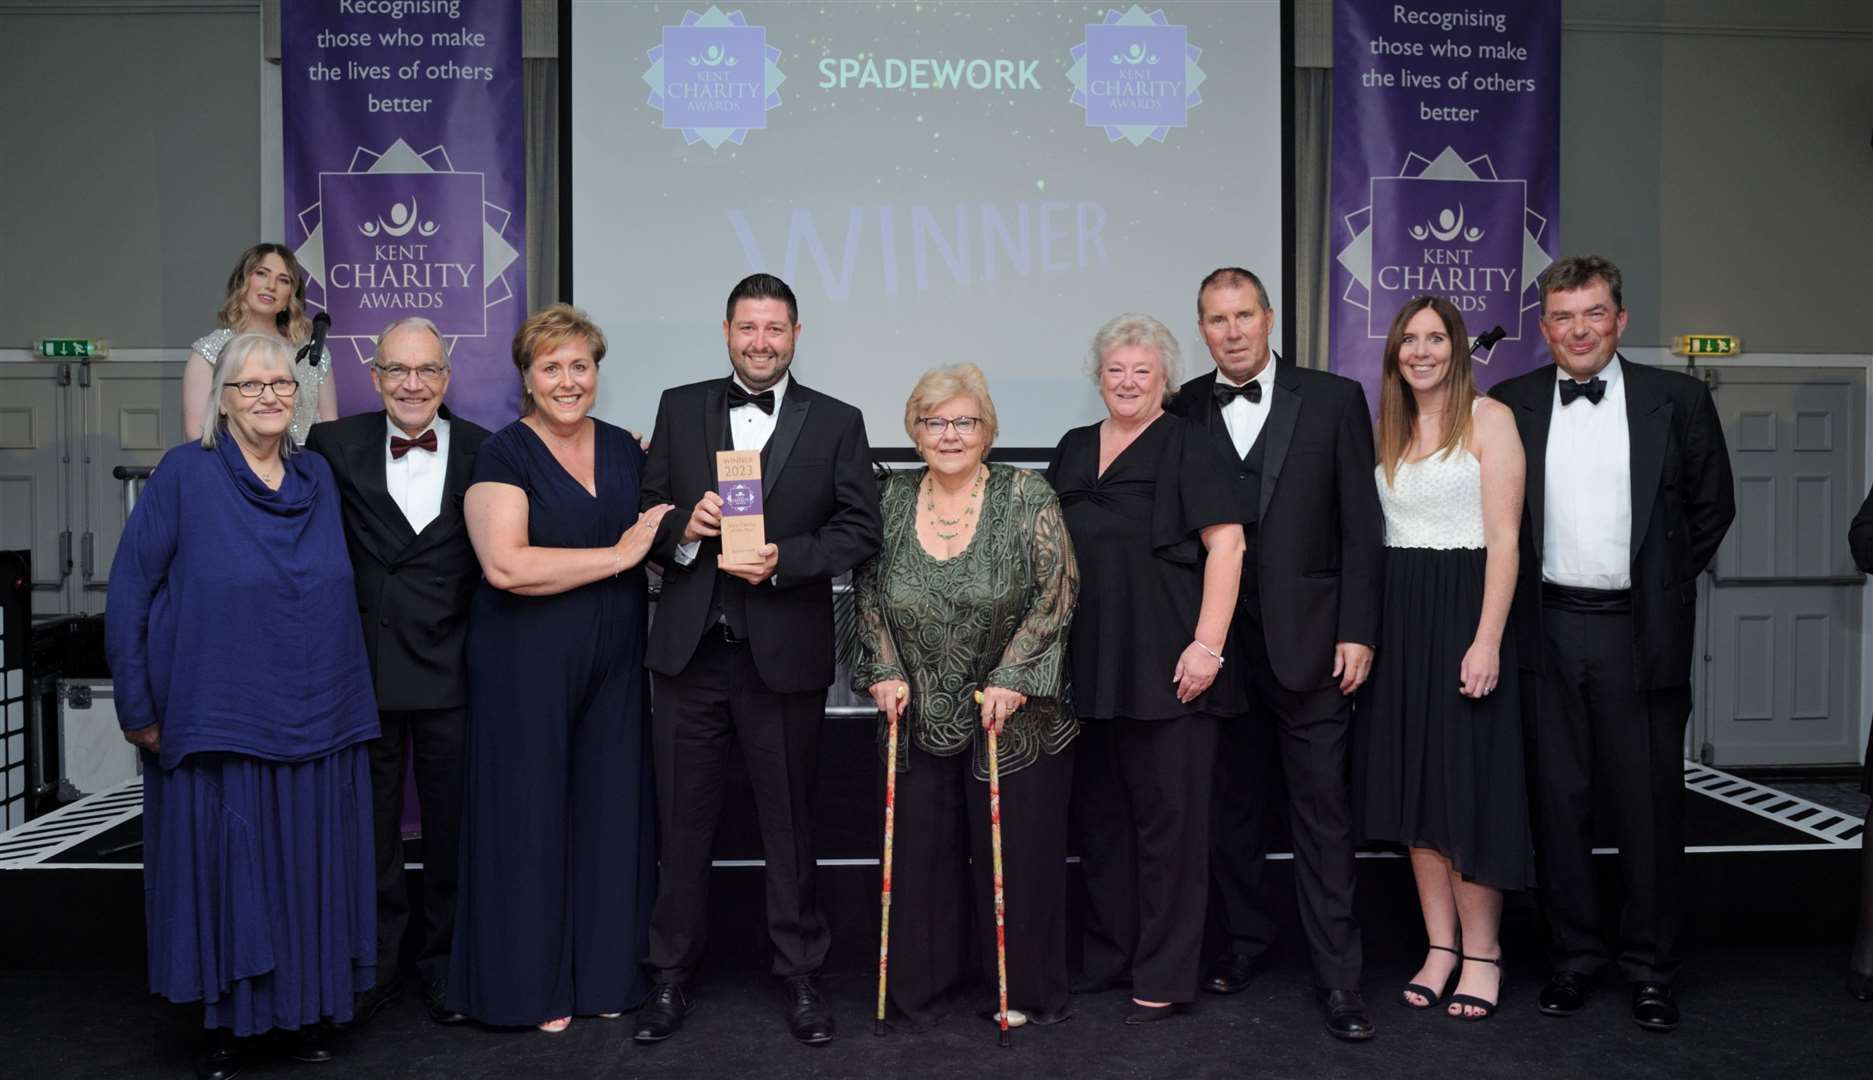 Offham-based charity Spadework won Kent Charity of the Year at this year’s Kent Charity Awards. Picture: Simon Hildrew